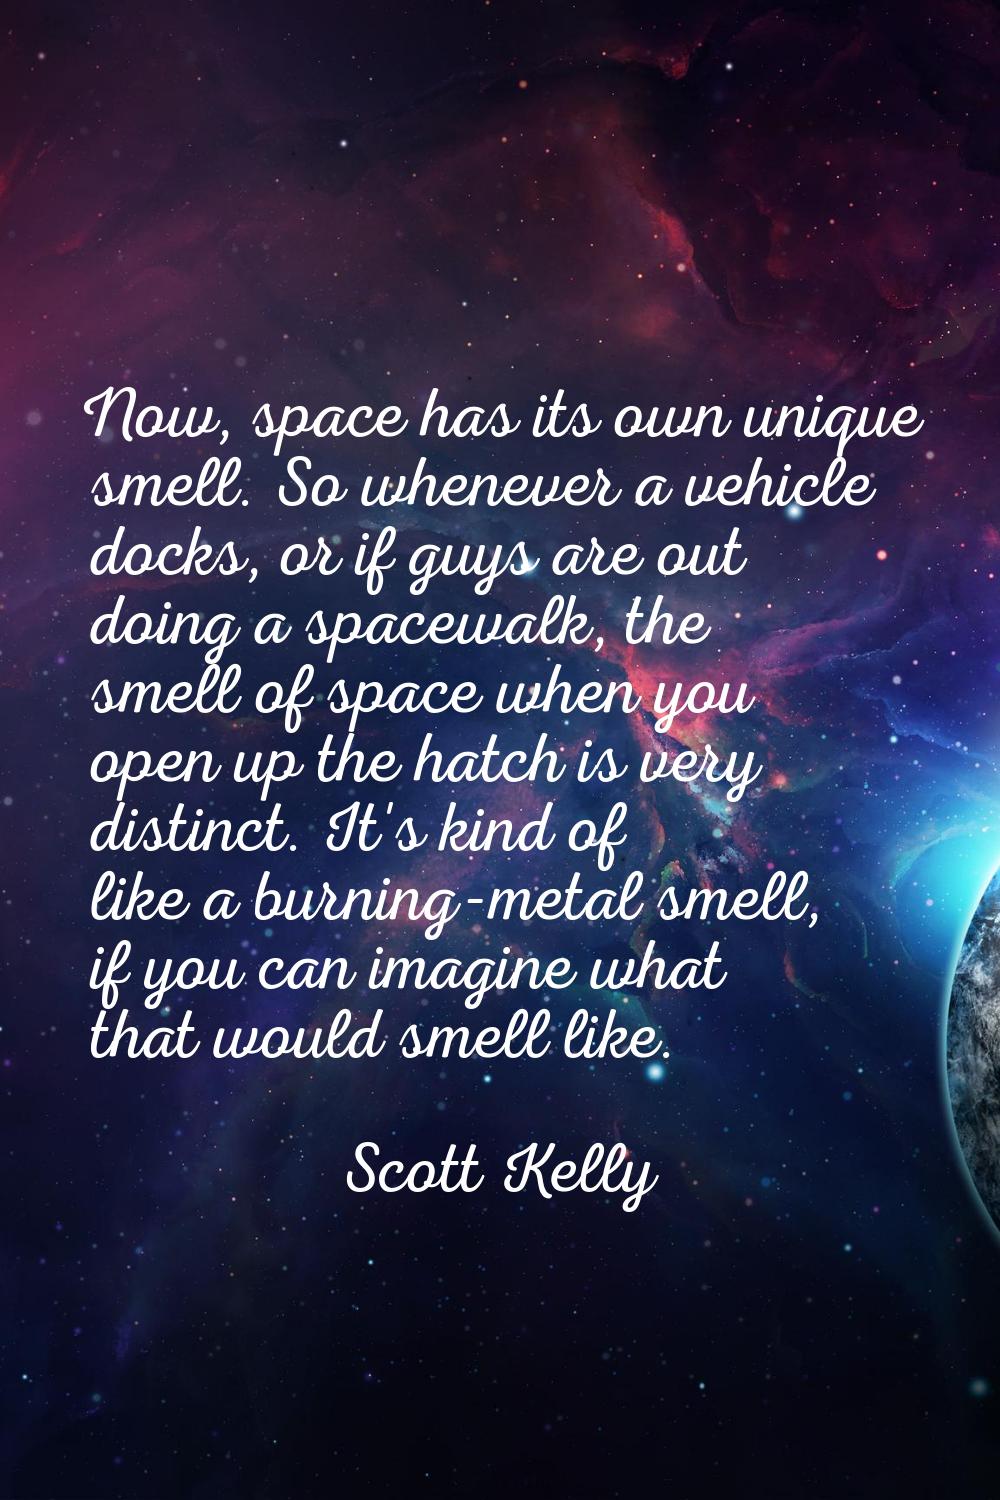 Now, space has its own unique smell. So whenever a vehicle docks, or if guys are out doing a spacew